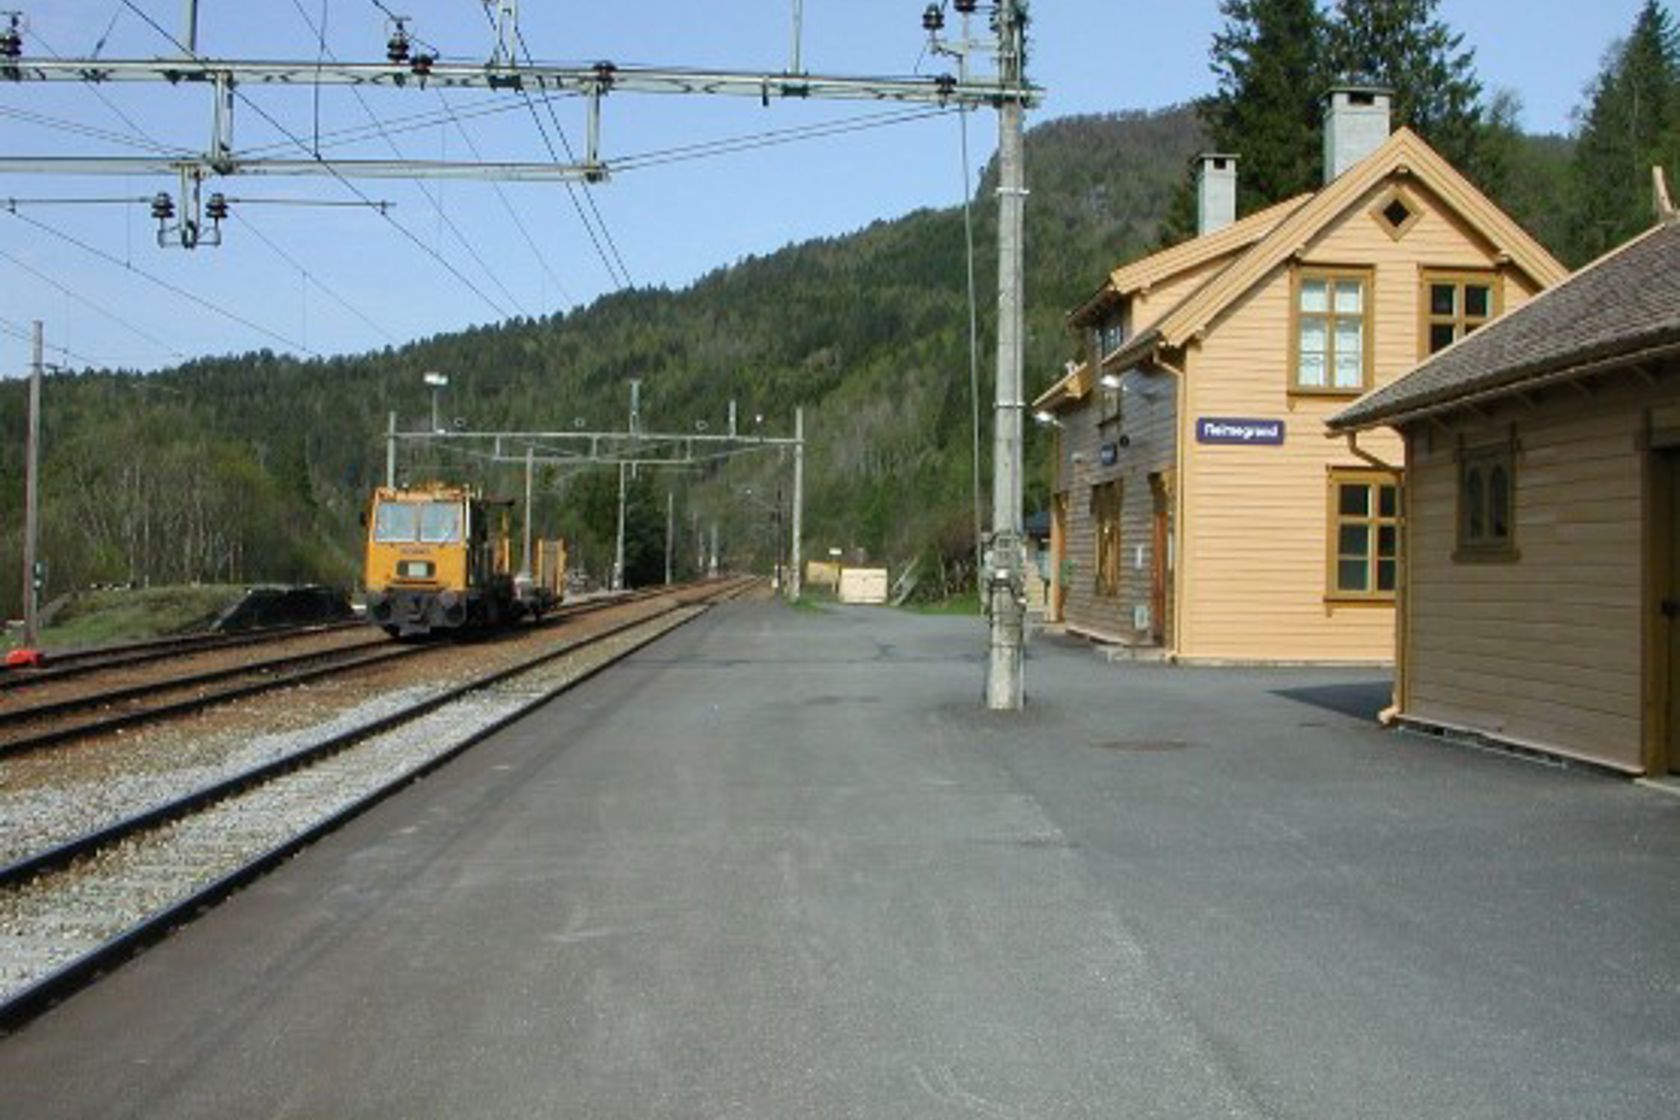 Exterior view of Reimegrend station